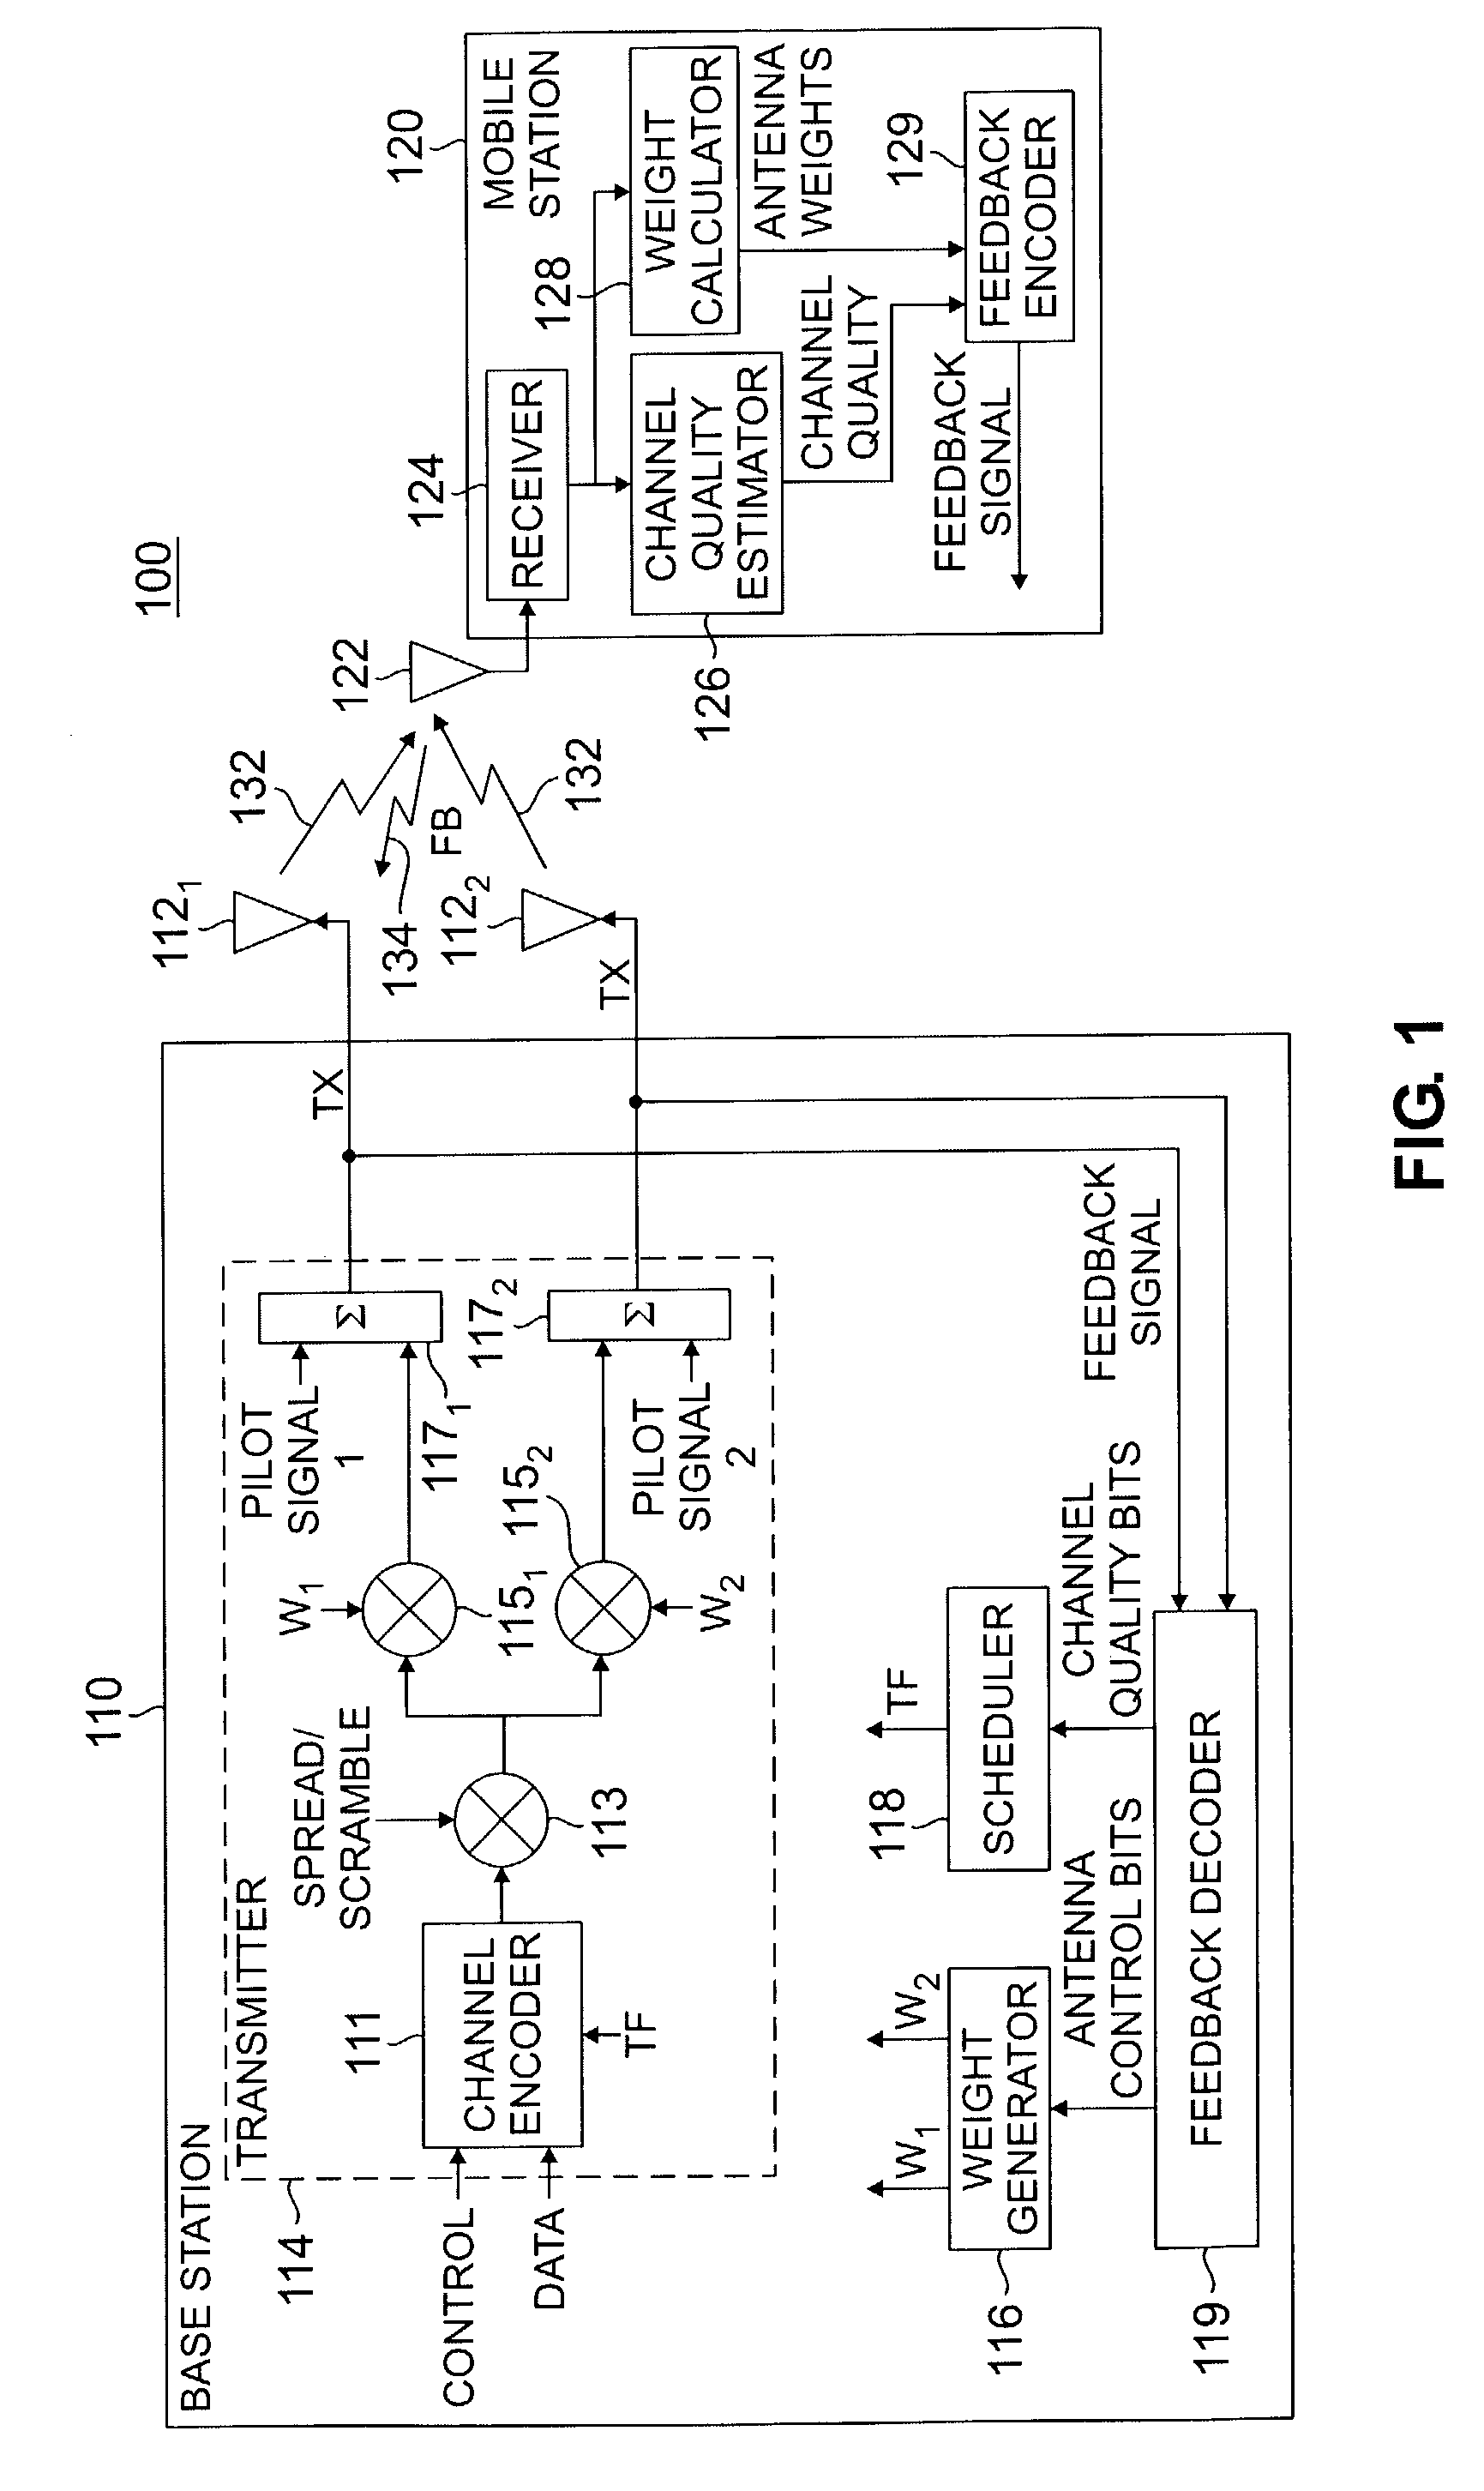 Method and apparatus for closed loop transmit diversity in a wireless communications system